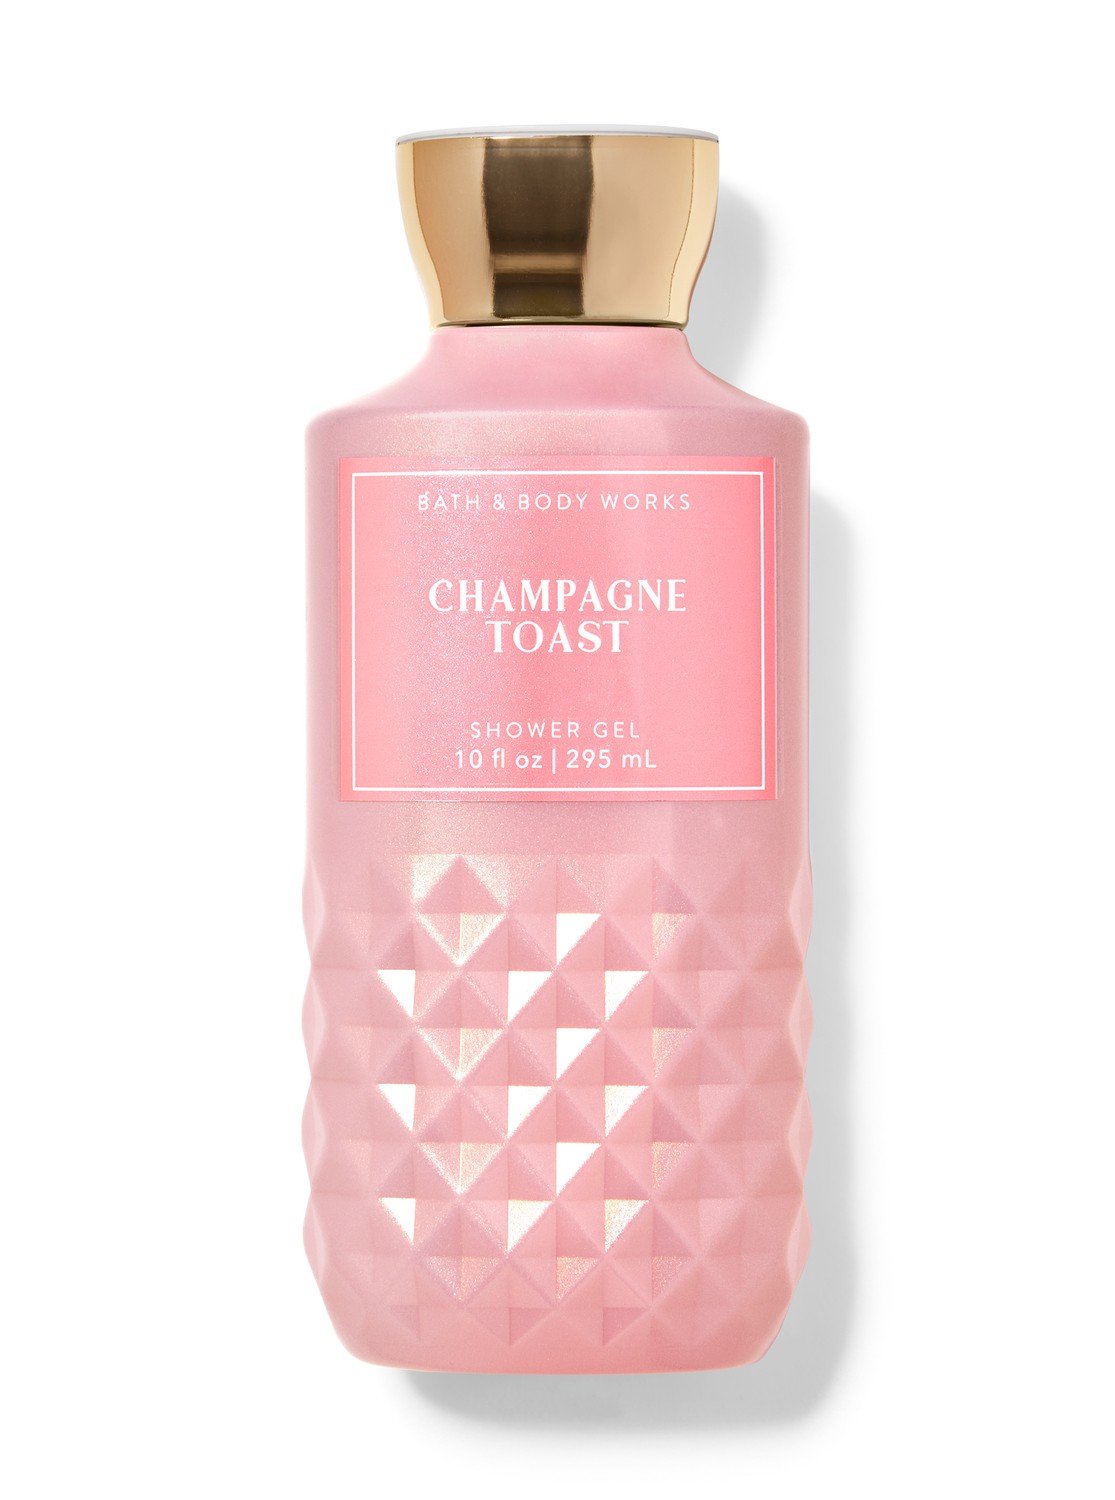 Champagne Toast|Bath & Body Works Australia Official Site